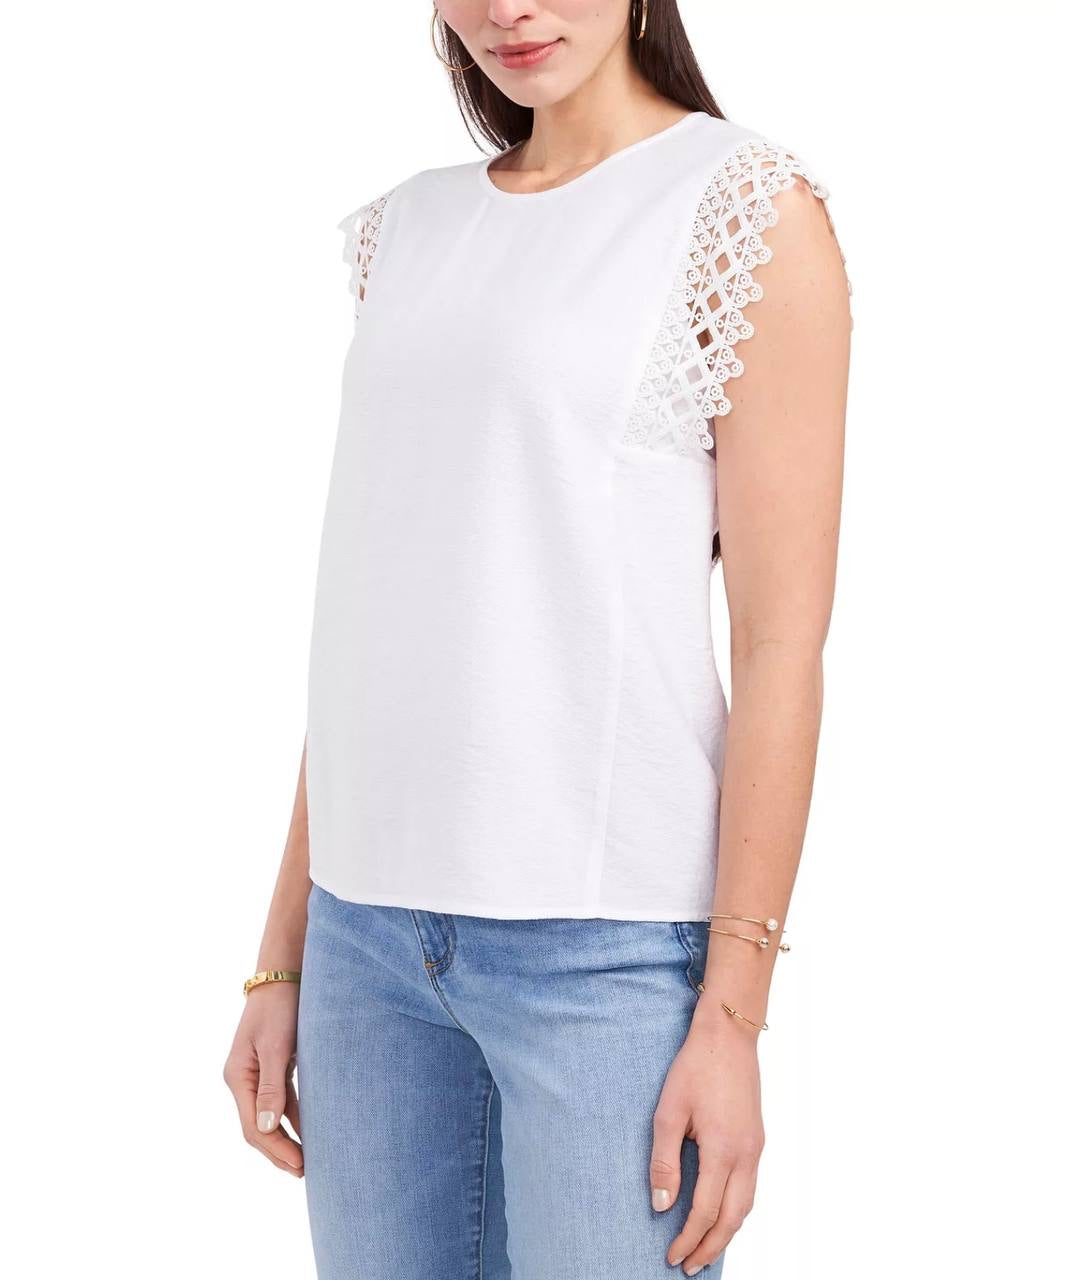 Vince camuto top